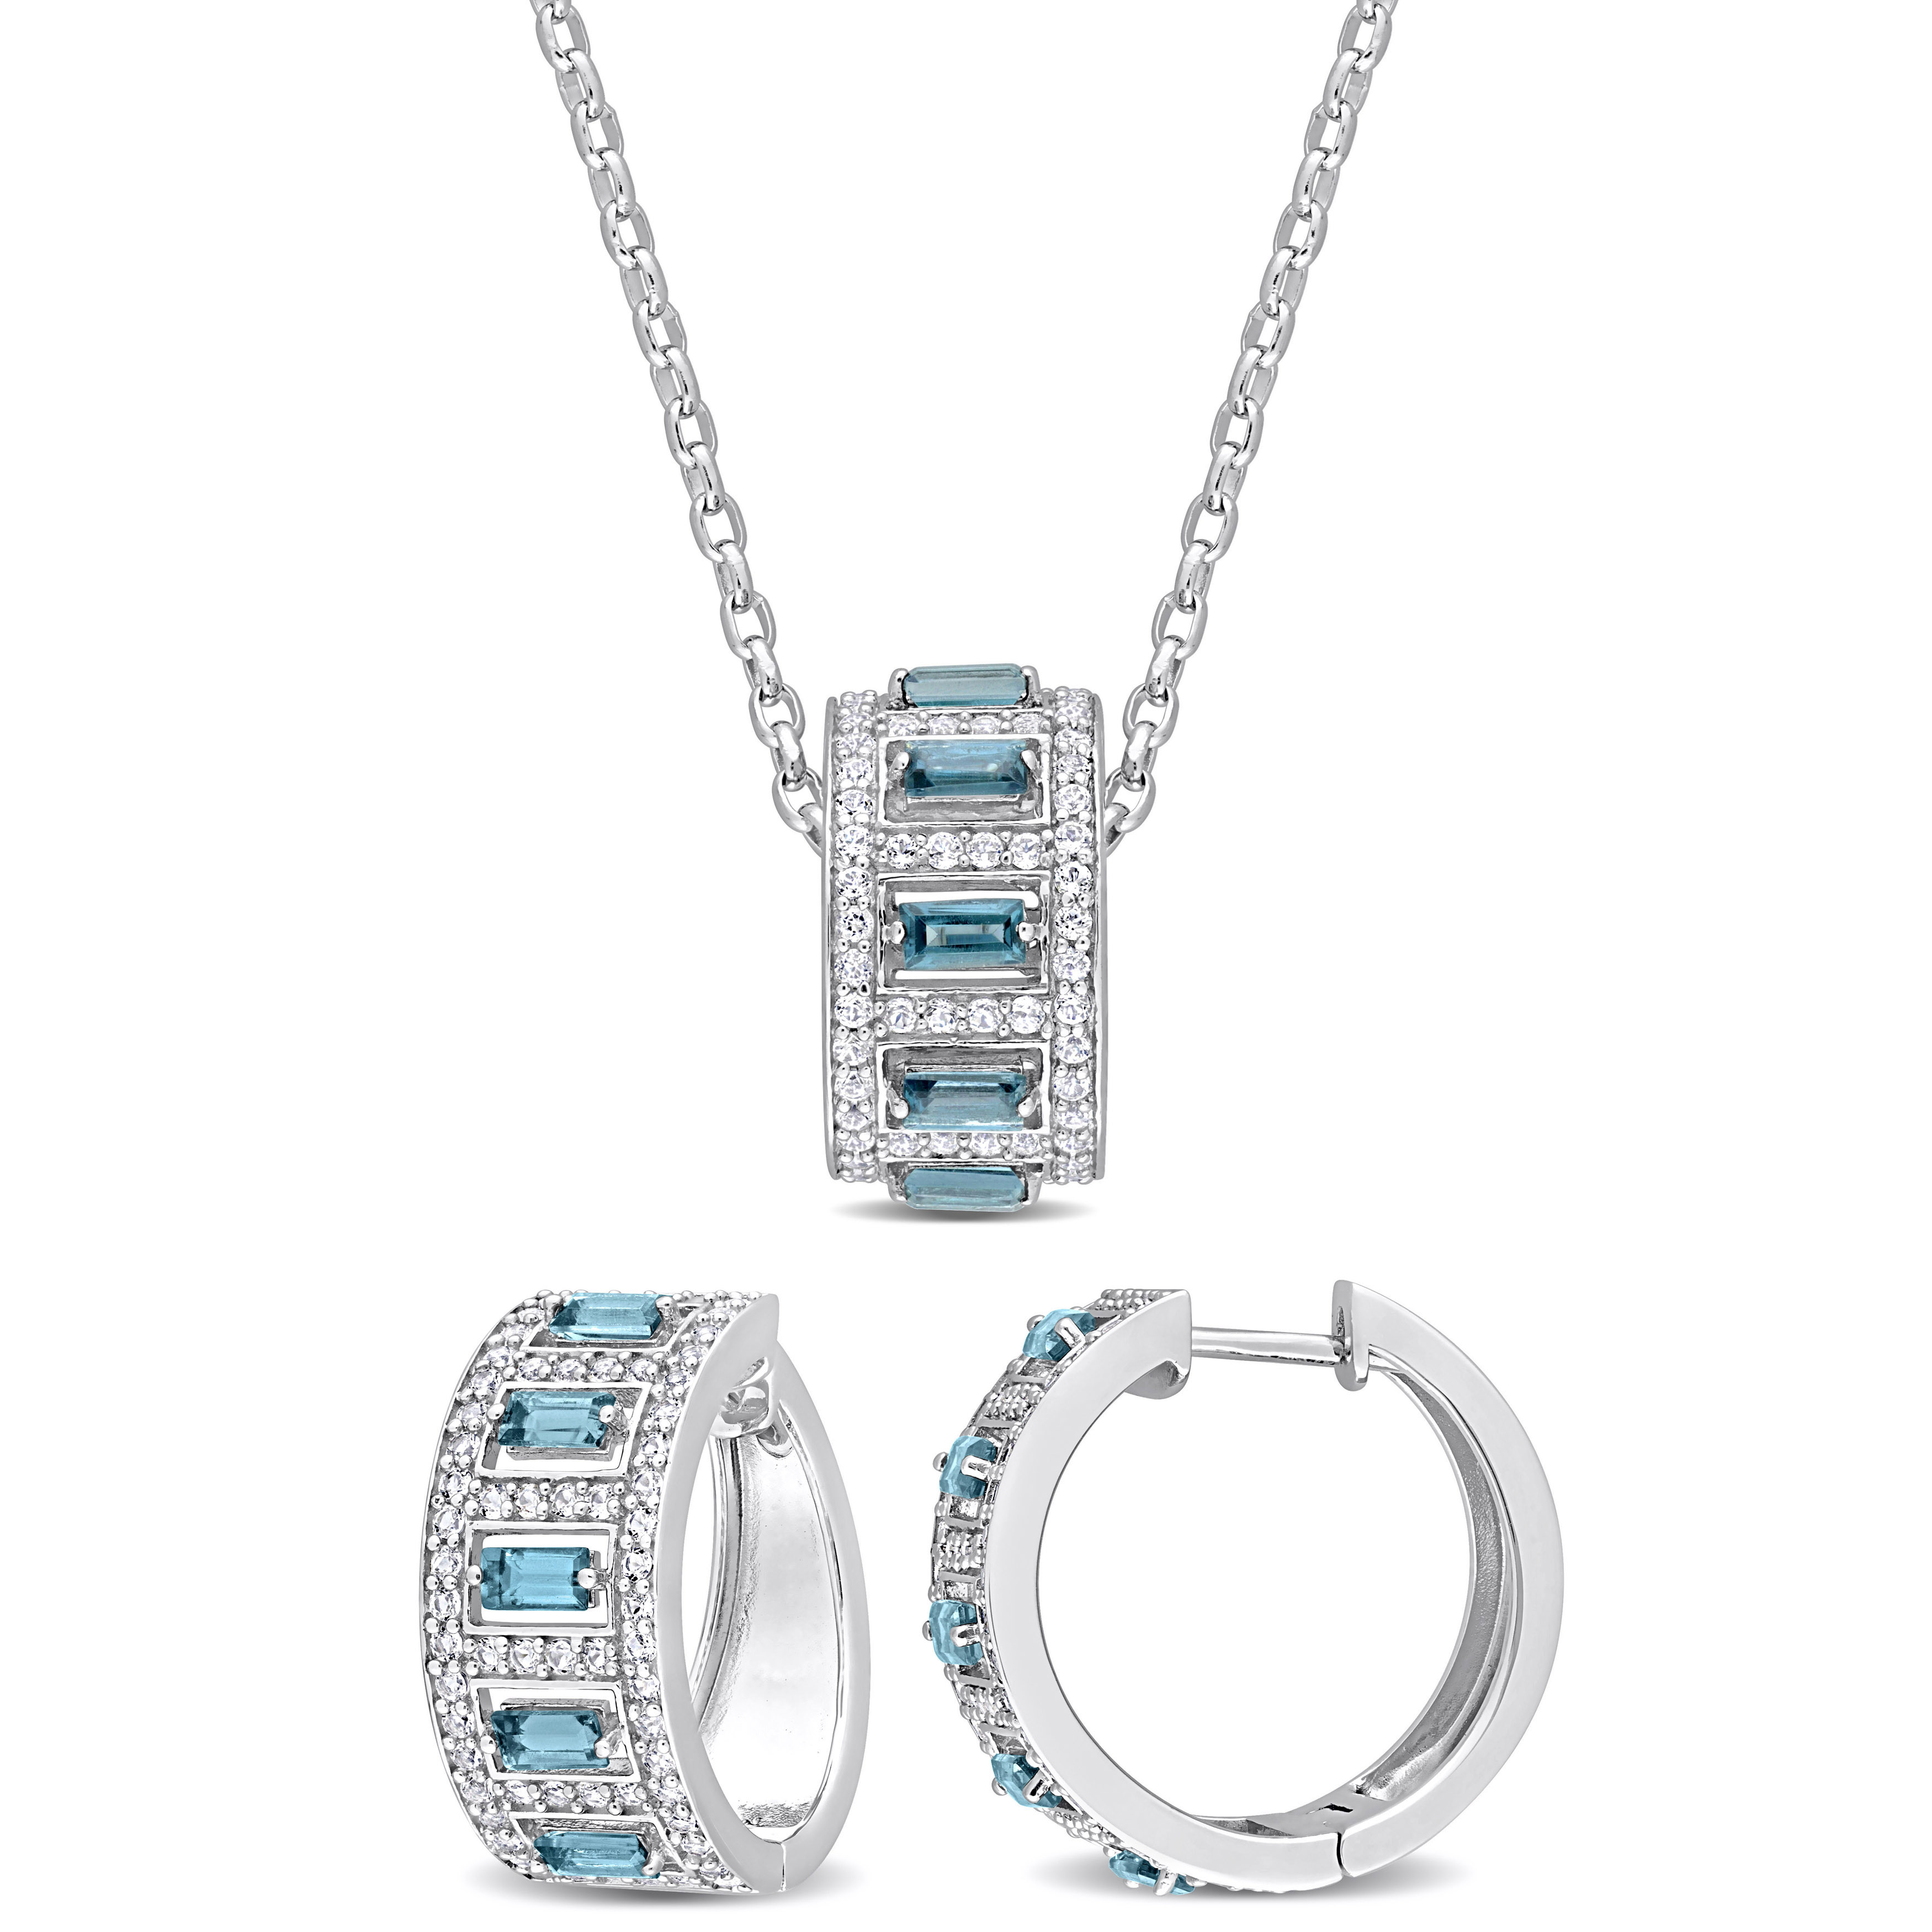 9 7/8 CT TGW Baguette-Cut London-Blue and White Topaz 2-Piece Eternity Design Necklace and Earrings Set in Sterling Silver